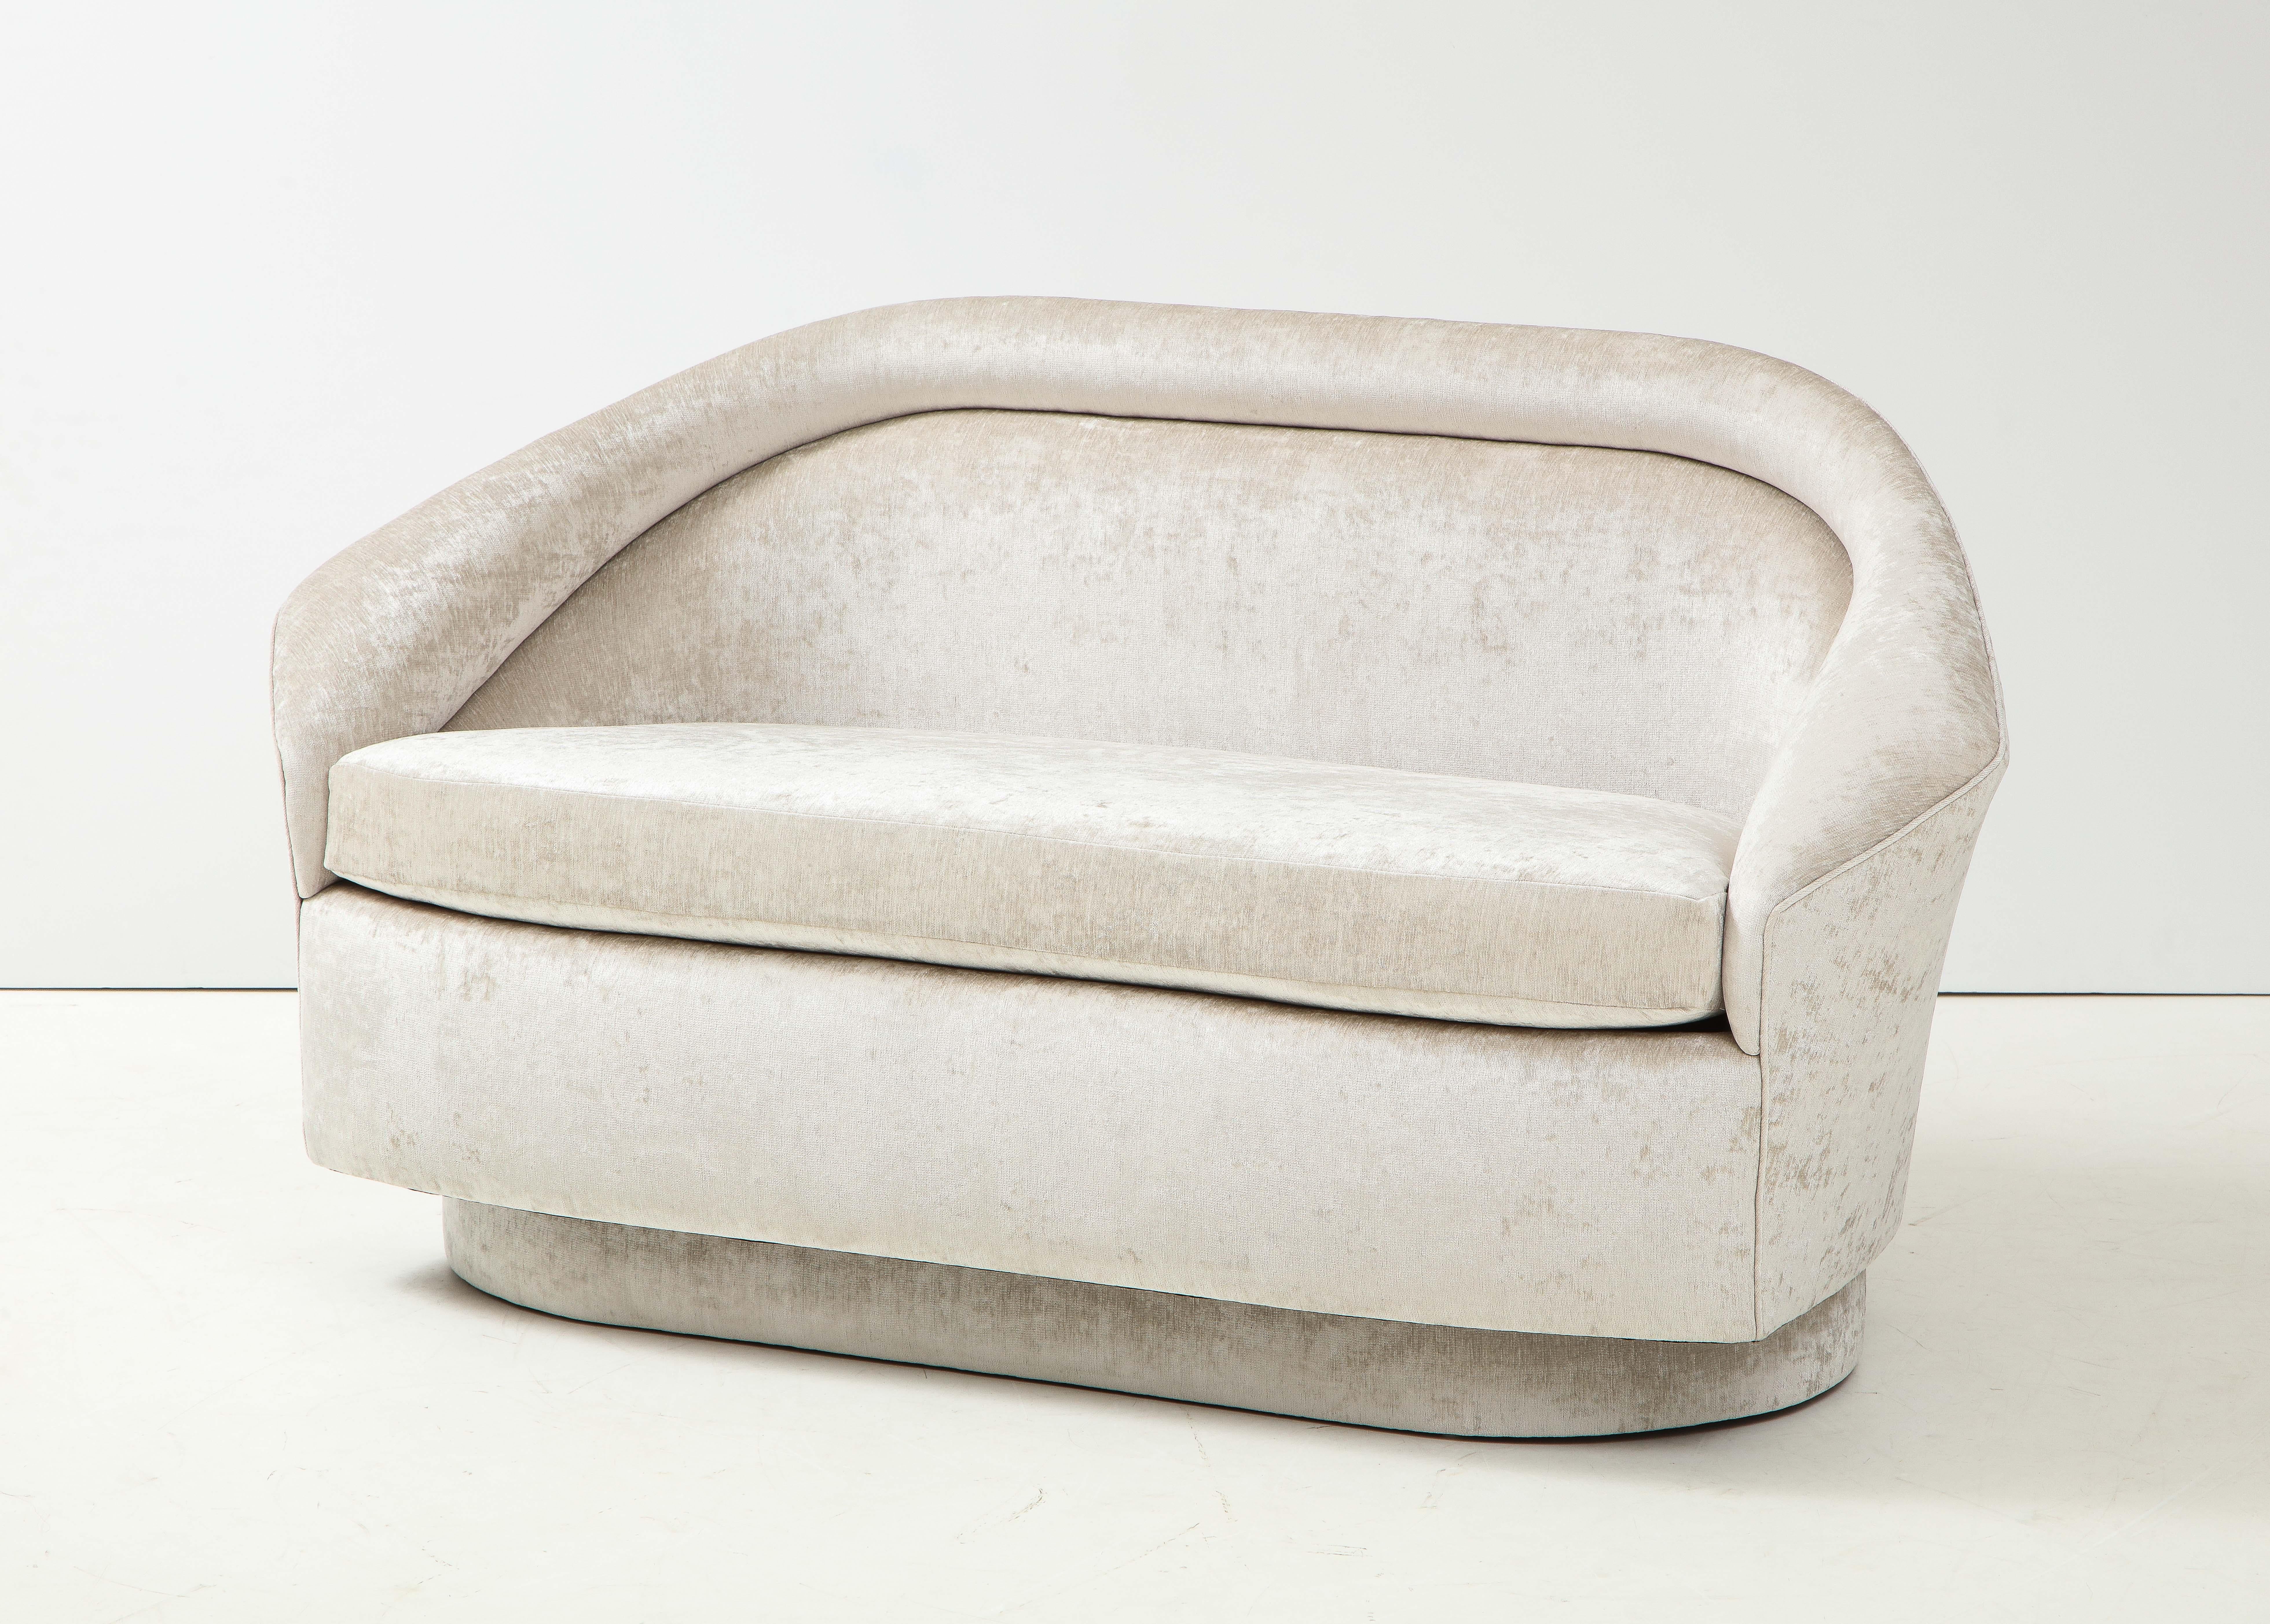 1970's Sculptural settee by Adrian Pearsall.
Elegant settee that has beautifully reupholstered in a luxurious soft
Ivory chenille fabric.